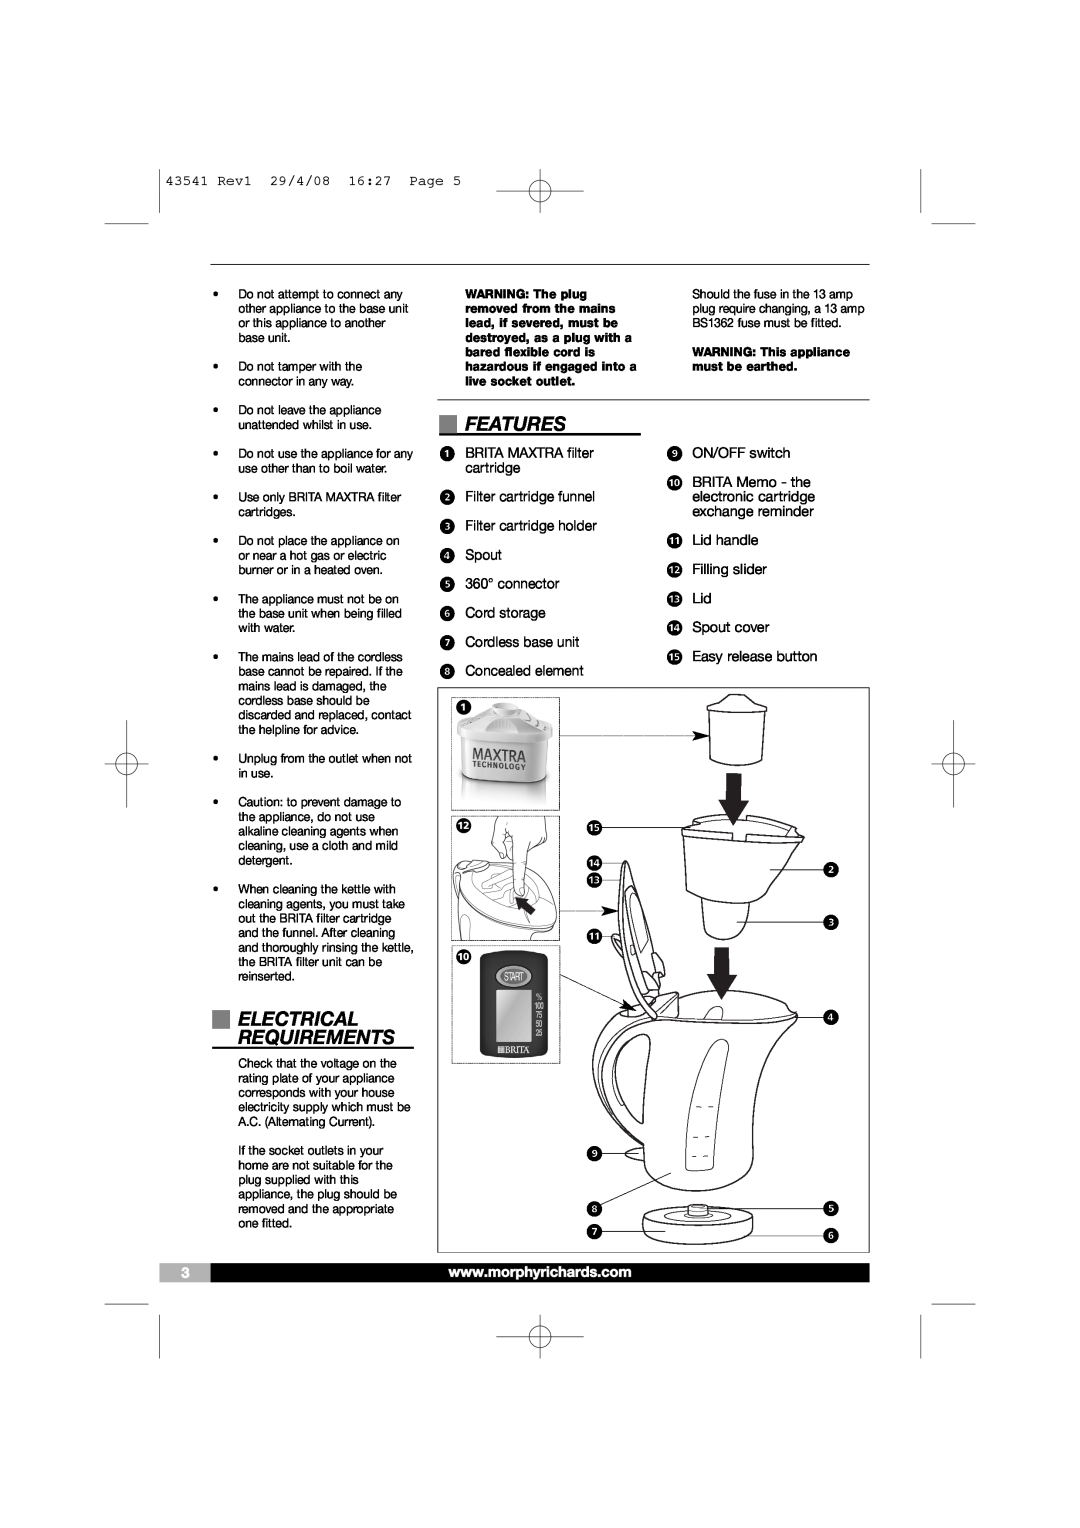 Morphy Richards 43541 manual Electrical Requirements, Features 